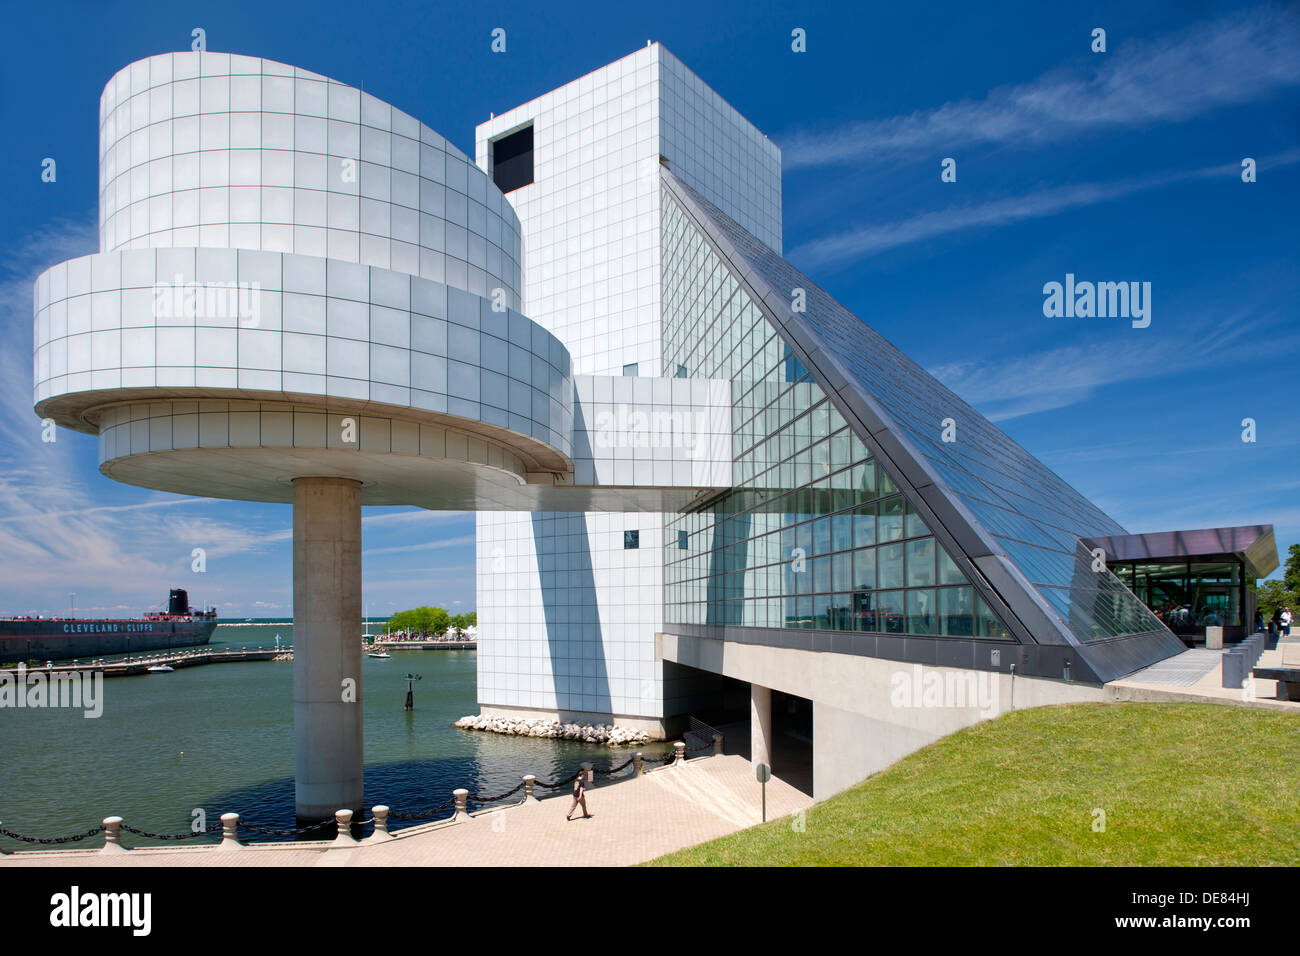 ROCK AND ROLL HALL OF FAME (© I M PEI 1995) DOWNTOWN CLEVELAND CUYAHOGA COUNTY OHIO USA Stockfoto